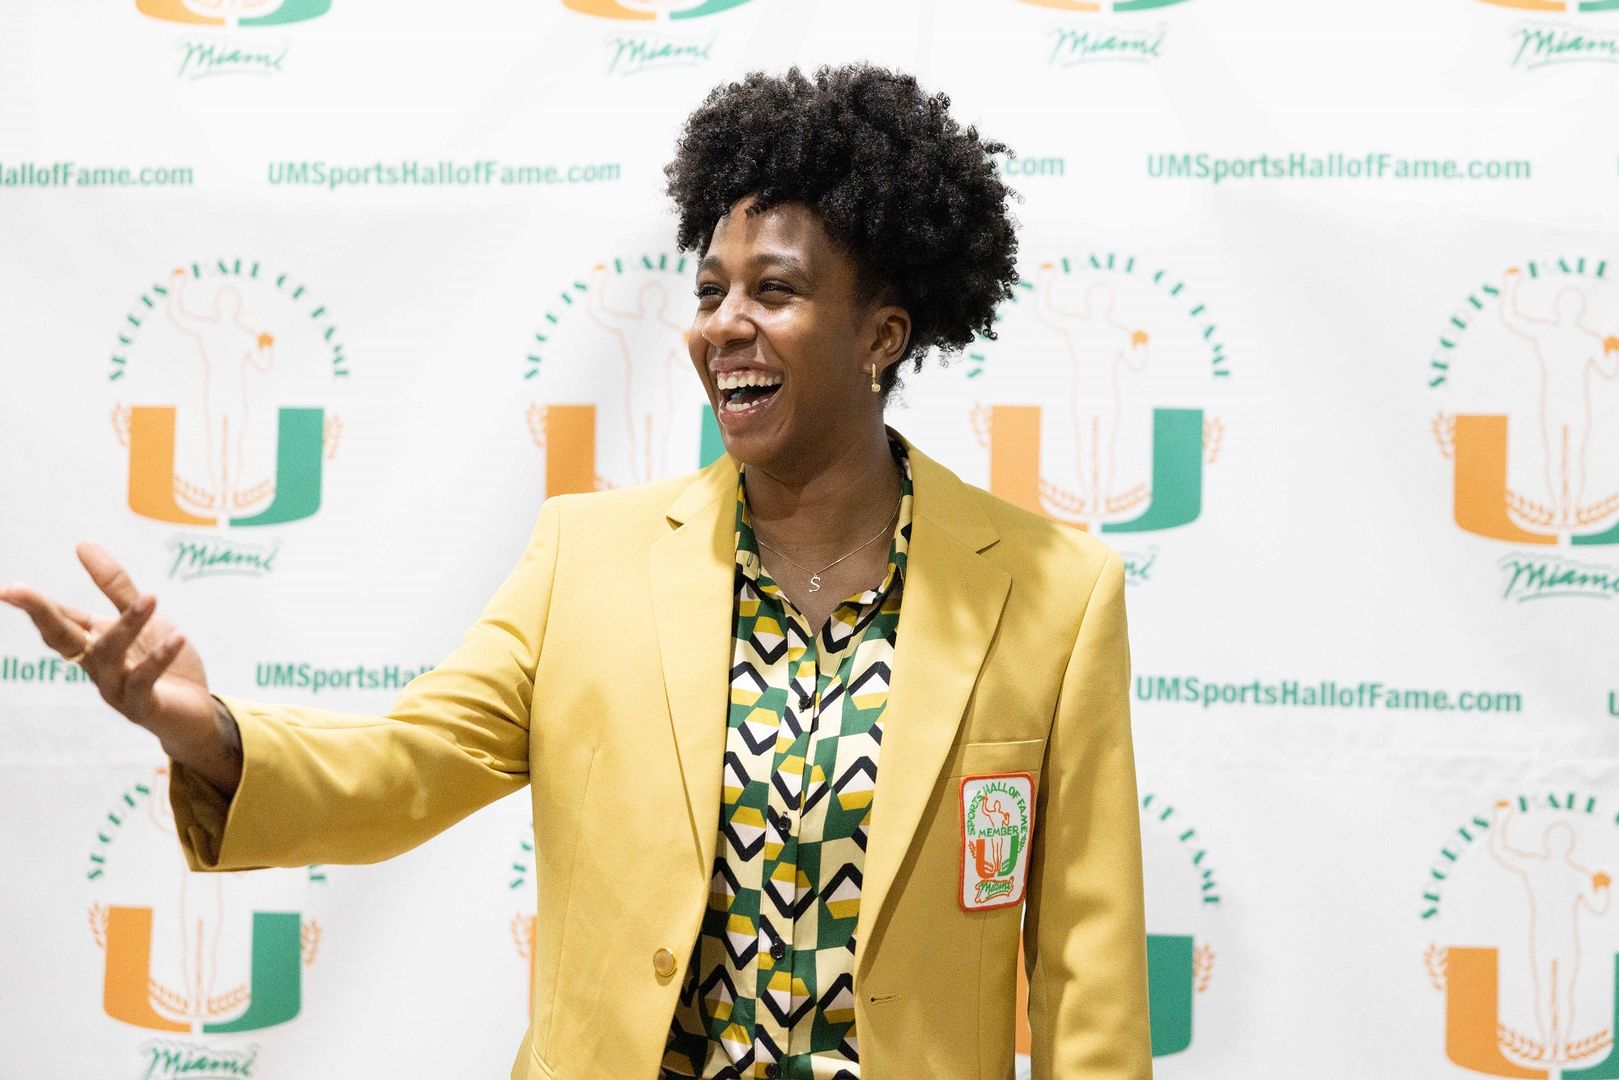 Photo Gallery: UM Sports Hall of Fame Induction Banquet